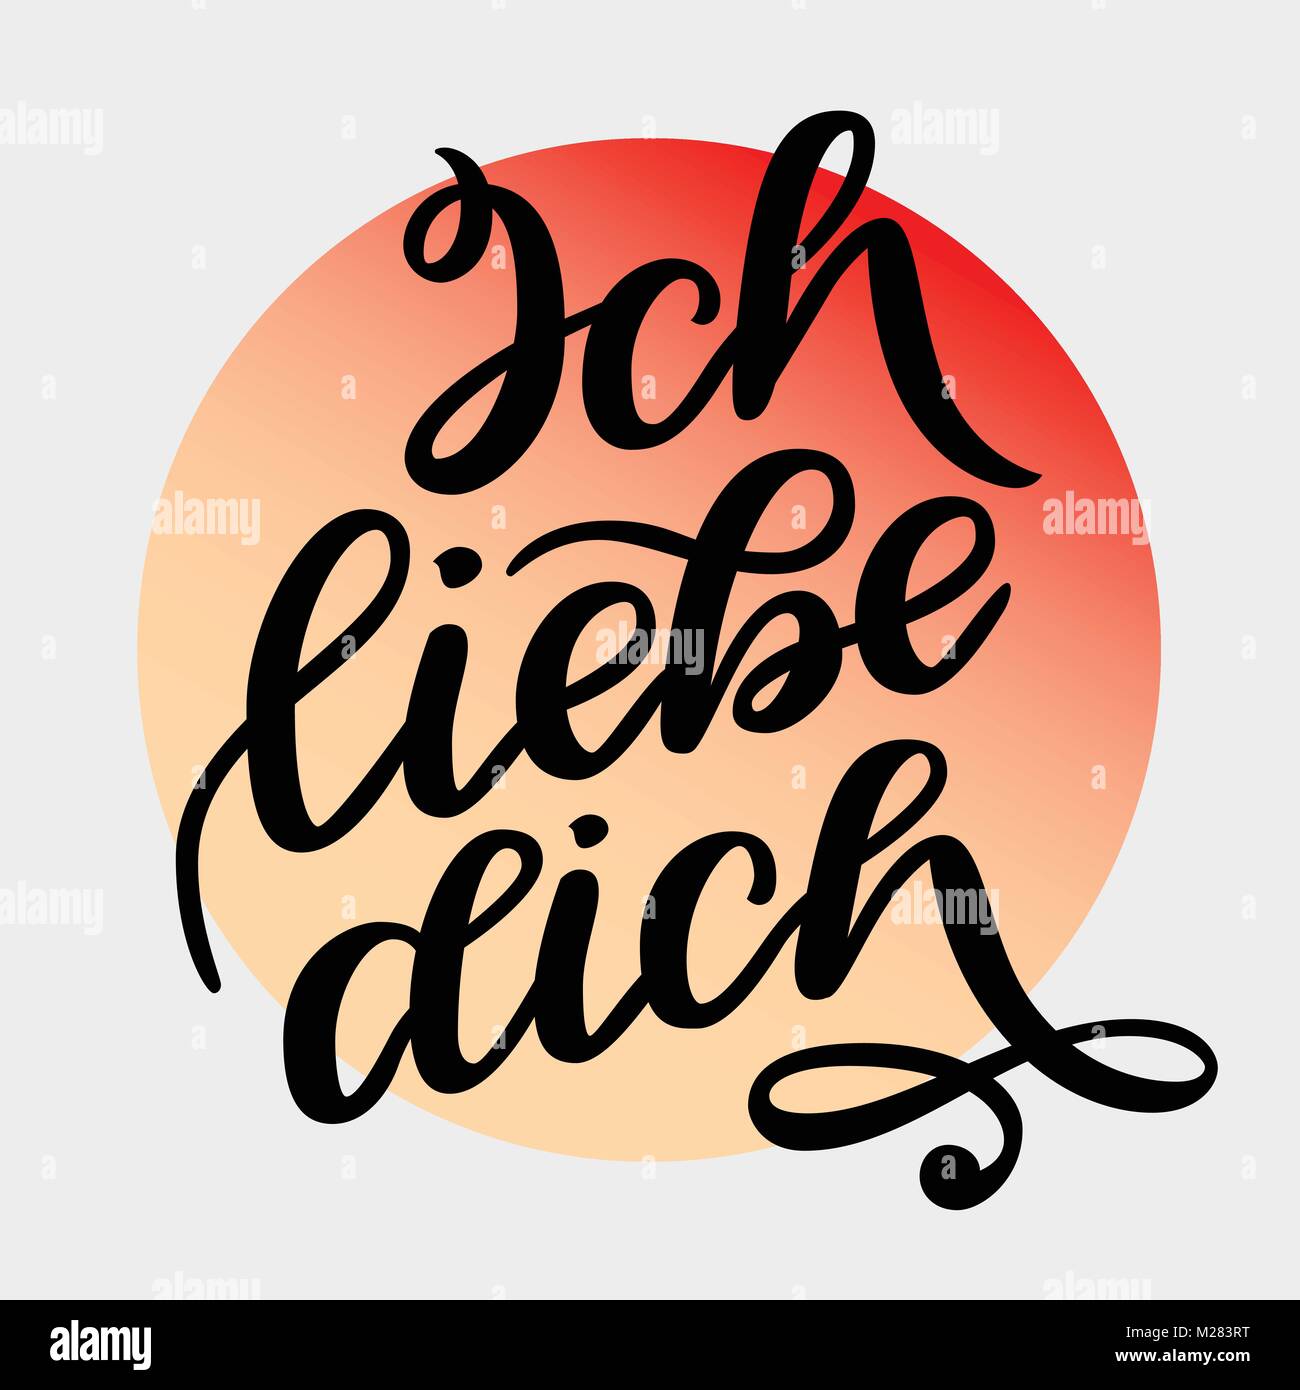 Handwritten text in German Ich liebe dich. Love you postcard. Phrase for Valentines day. Ink illustration. Modern brush calligraphy. Isolated on grey background with gradient circle Stock Vector